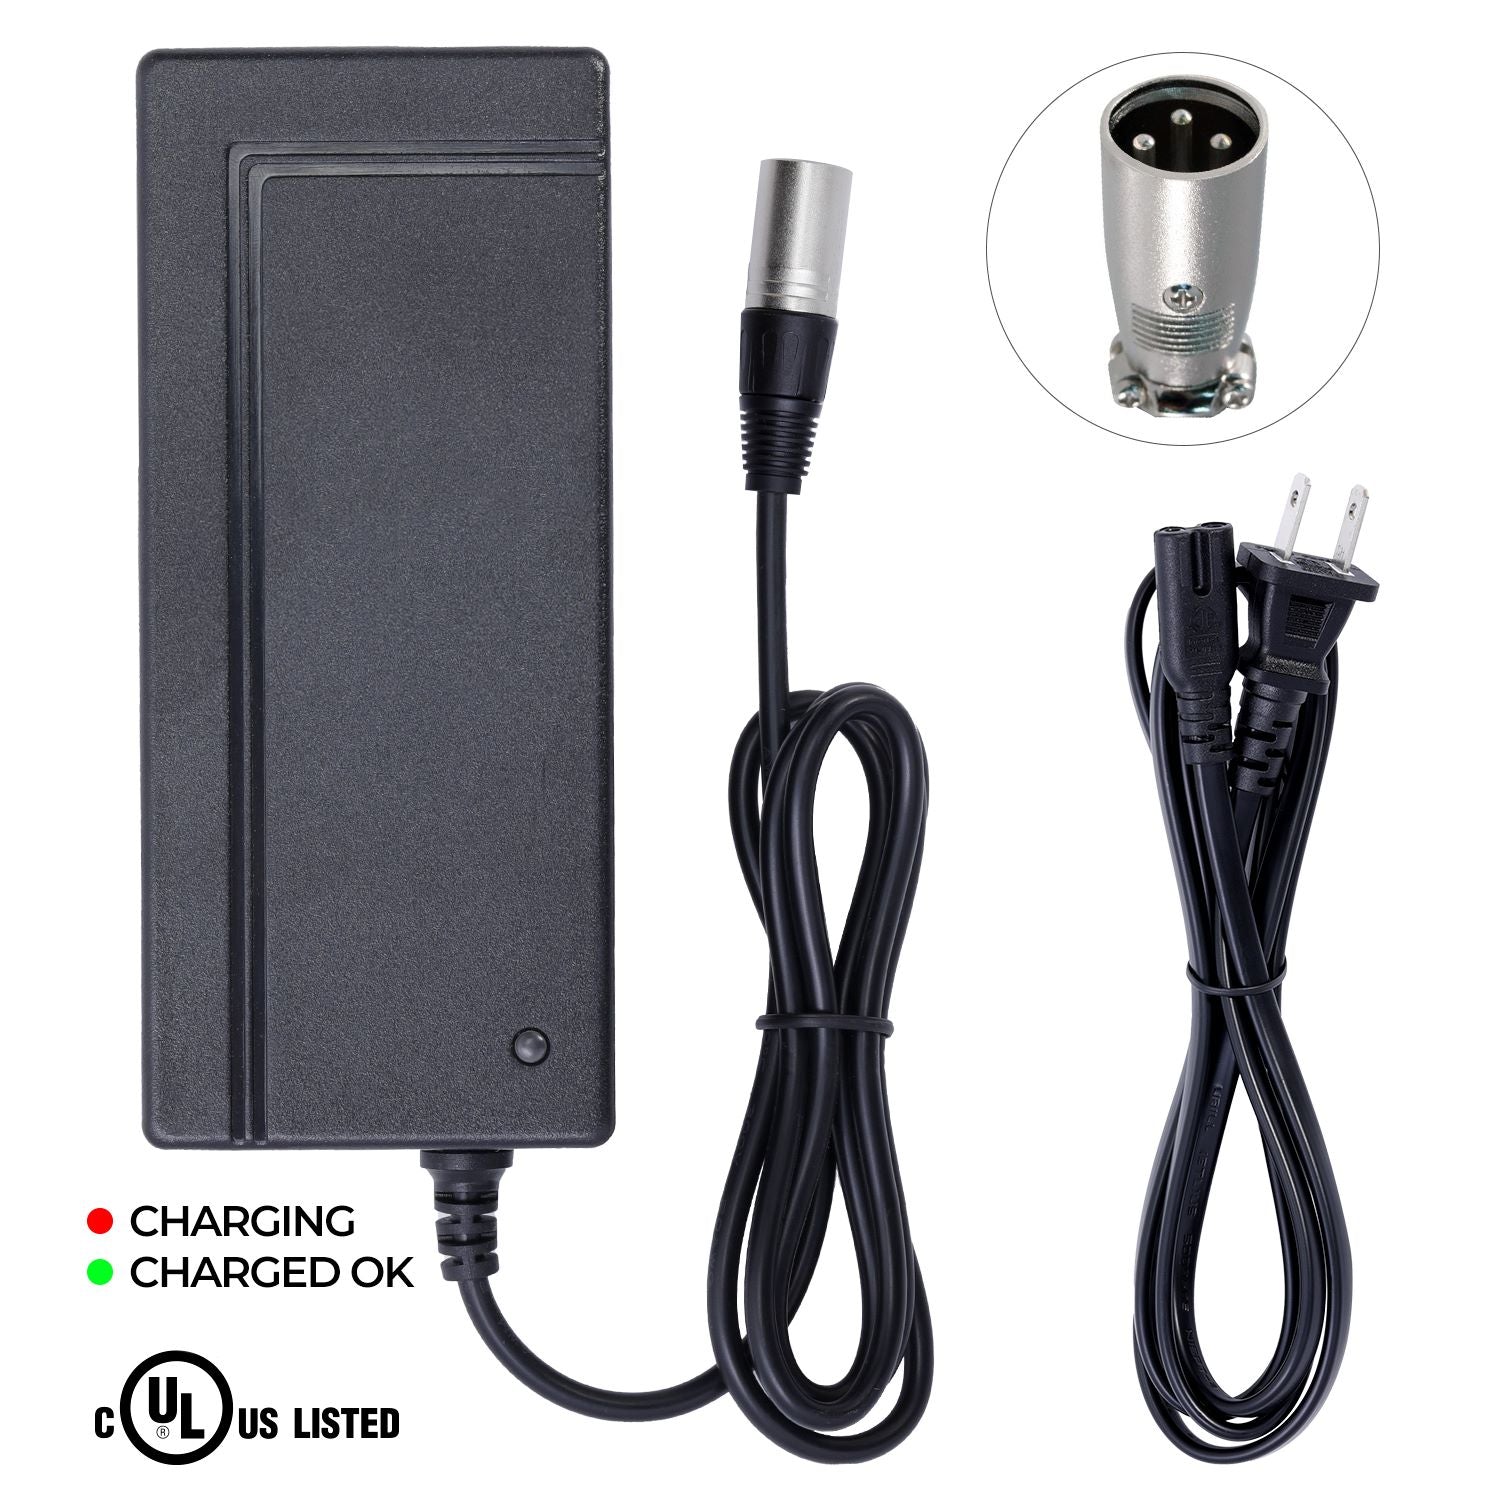 UL Certified Charger for Shoprider Dasher Series Mobility Scooter